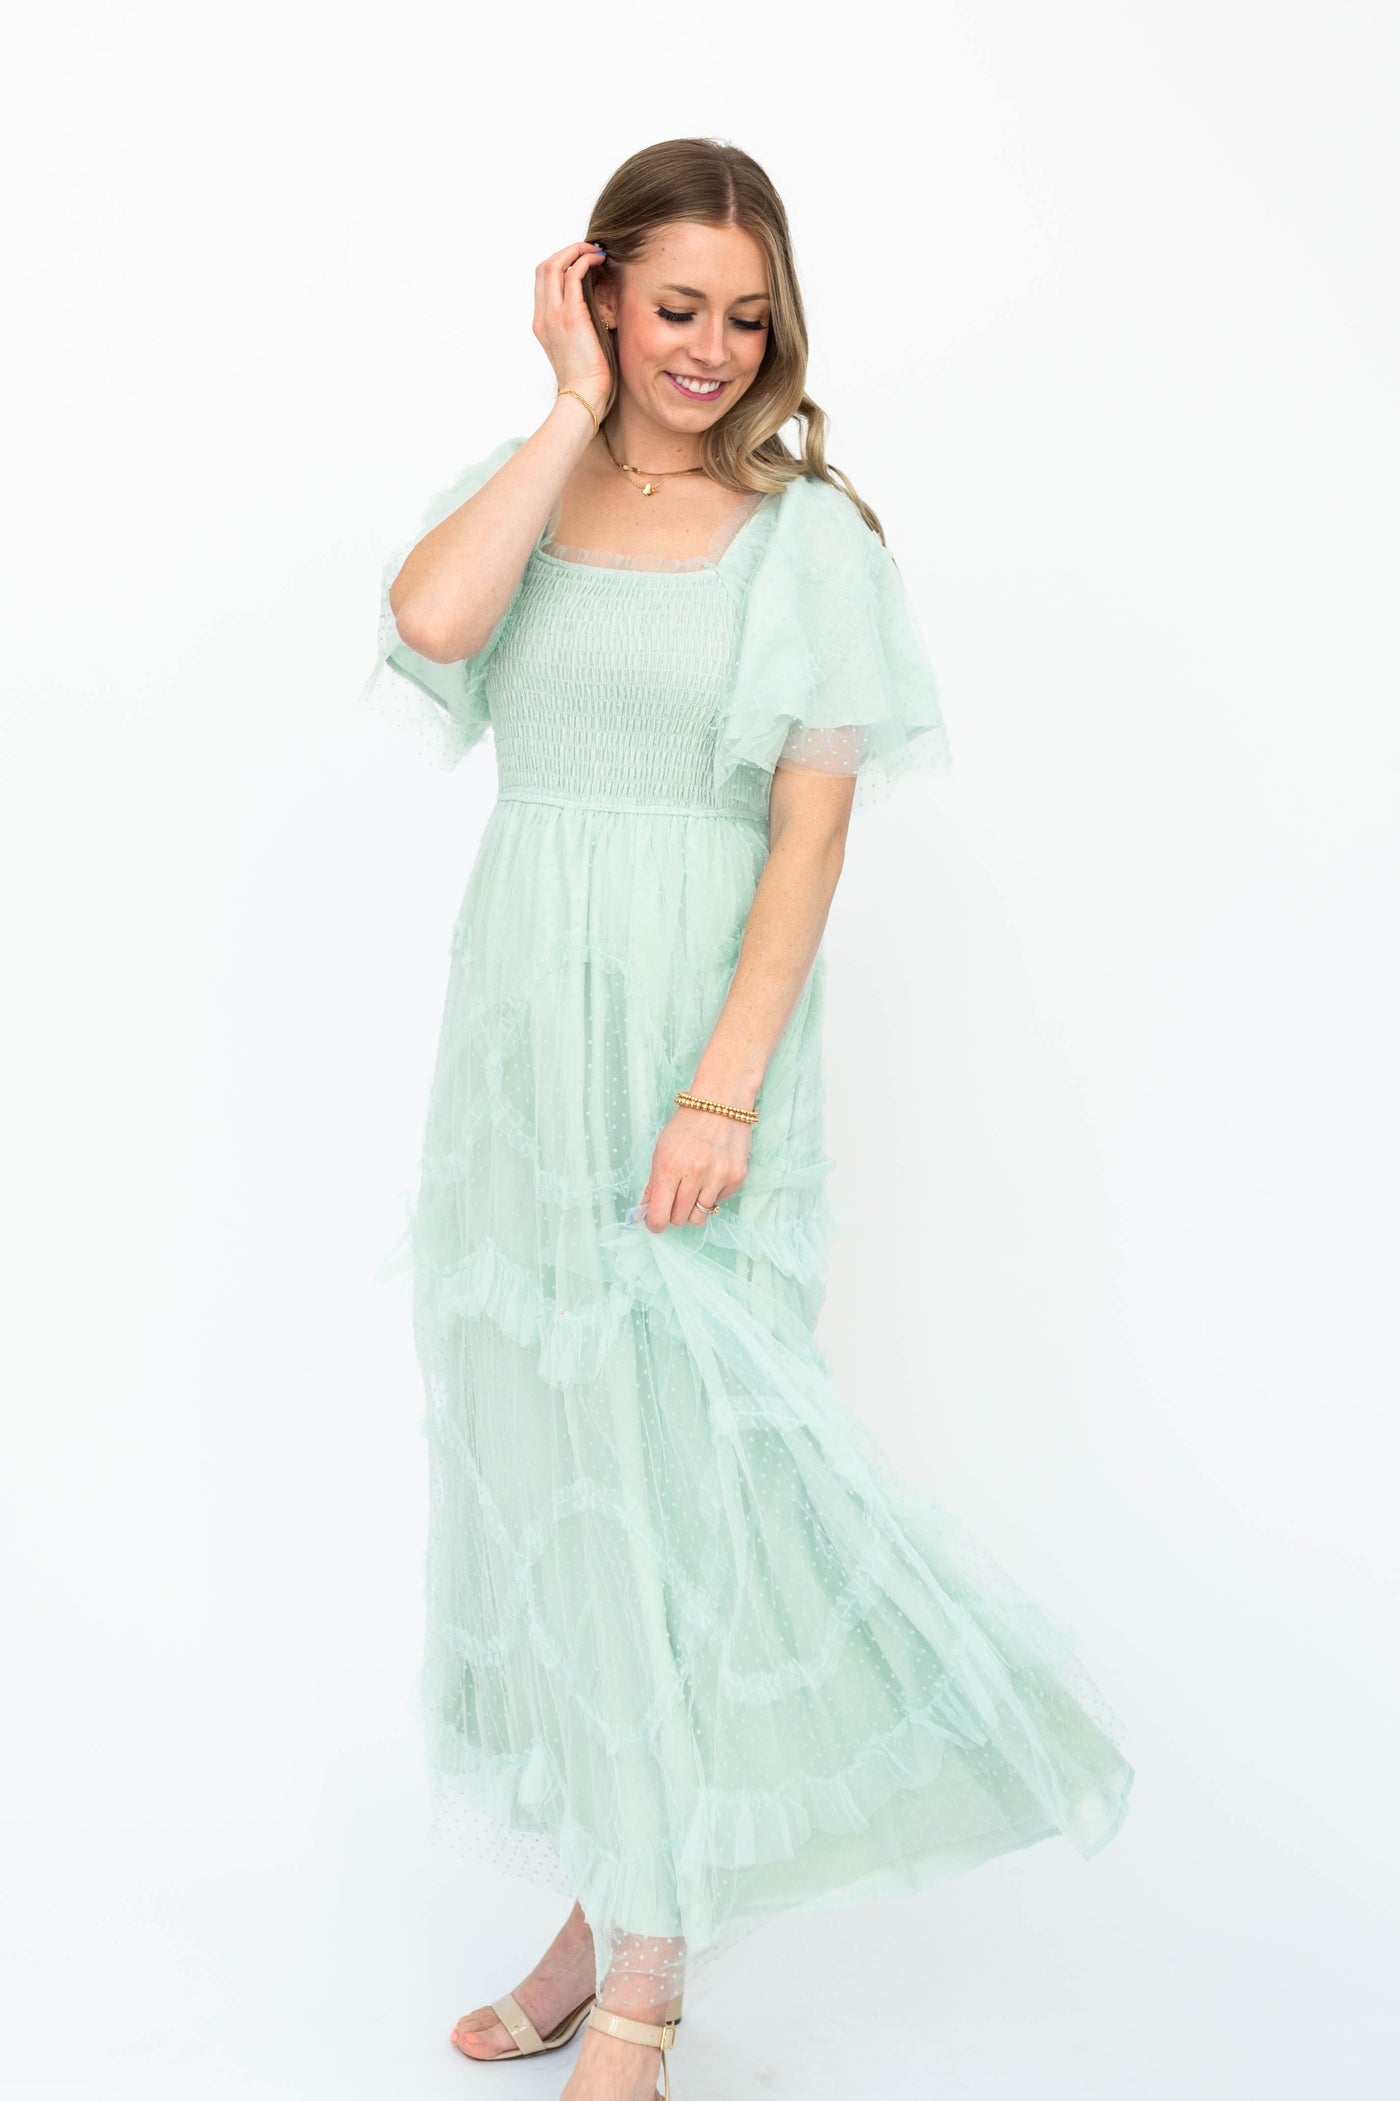 Short sleeve mint dress with smocked bodice and tiered skirt